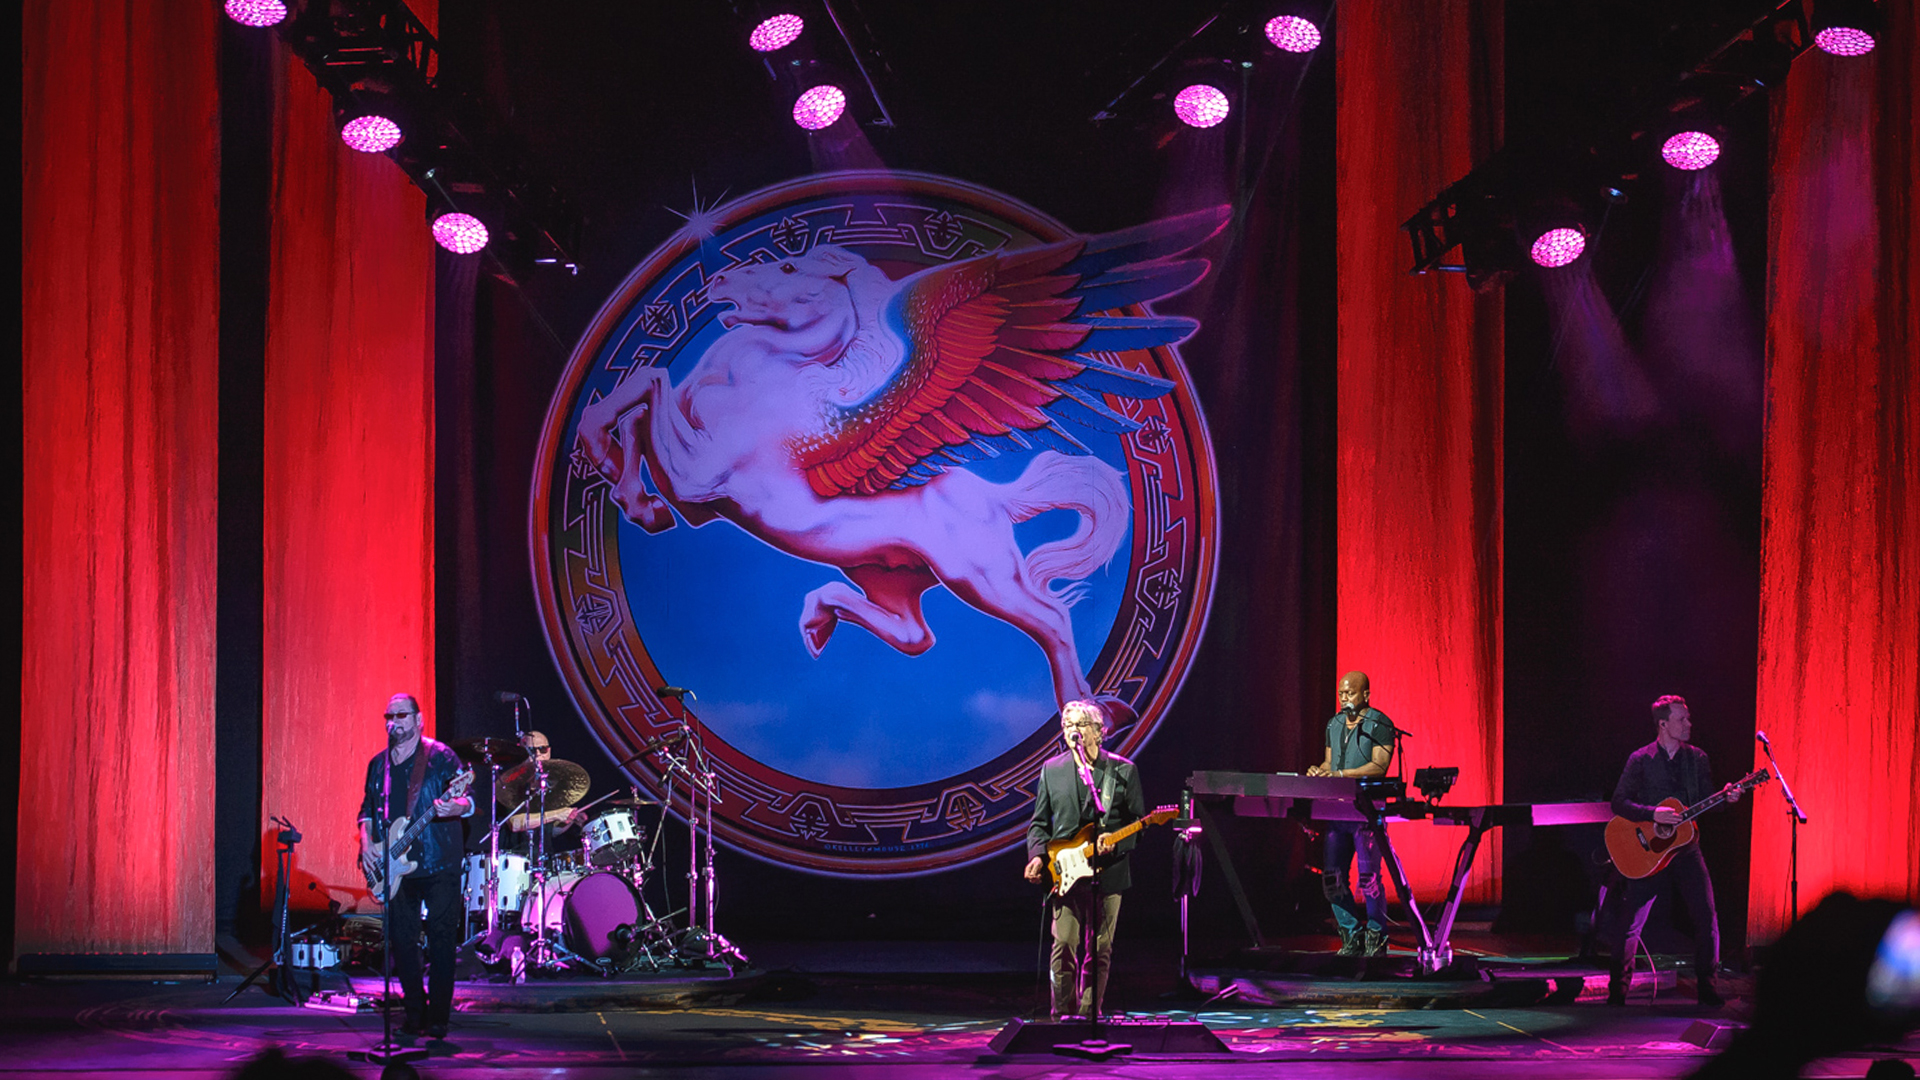 Photo Gallery: Steve Miller Band and Los Lonely Boys Live in Florida